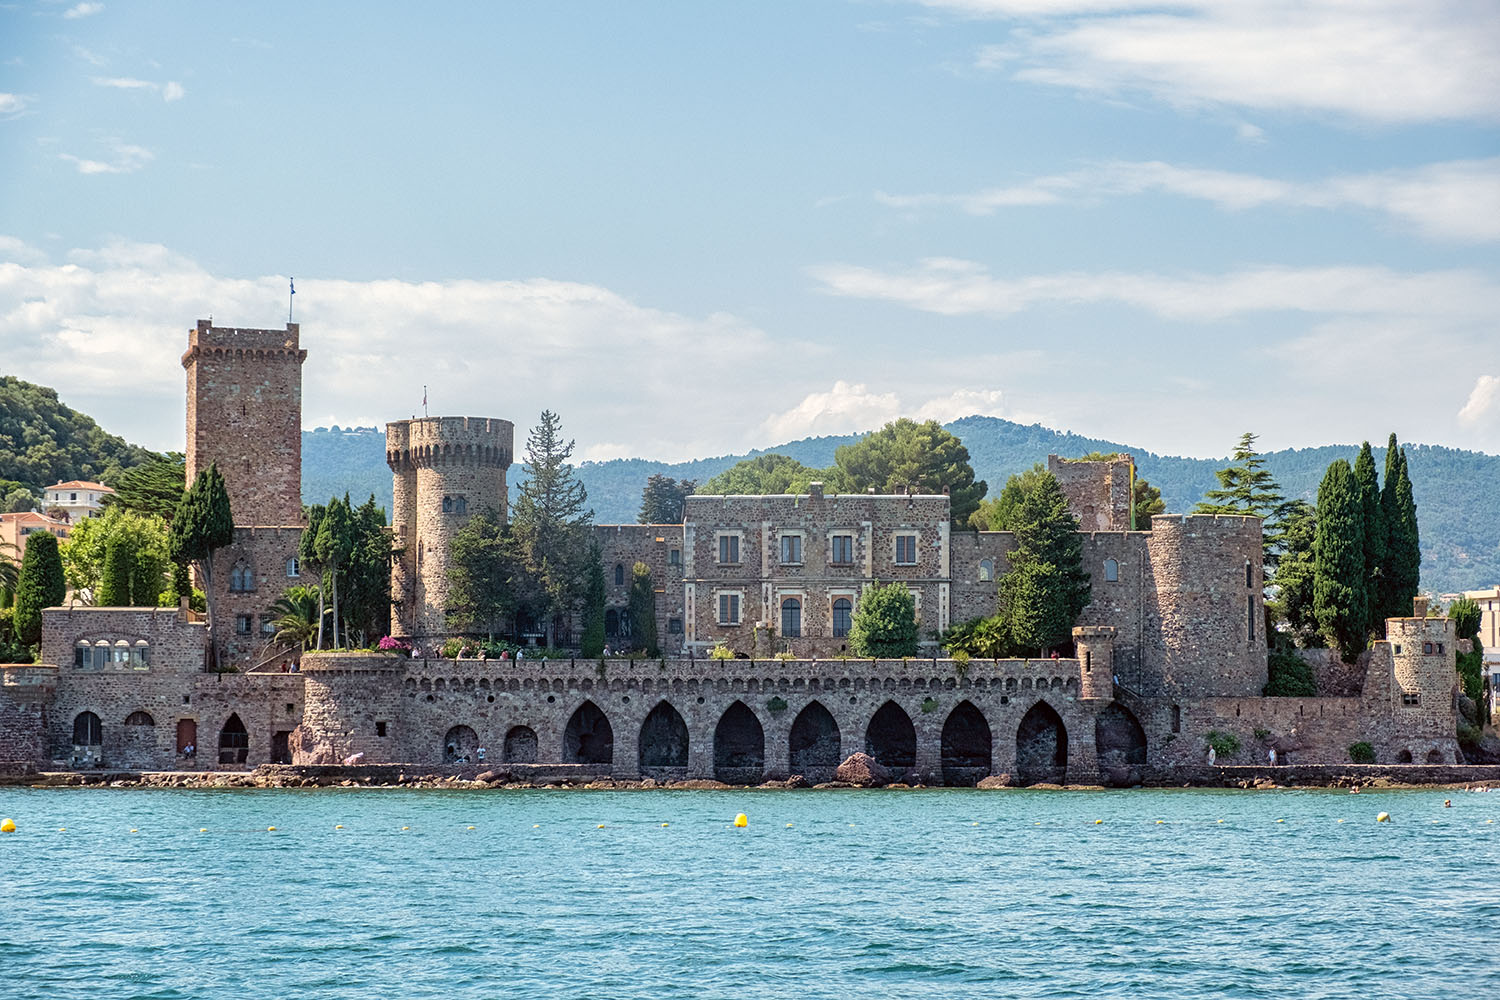 We got a great view of the castle as we headed into the harbor of Mandelieu–La Napoule